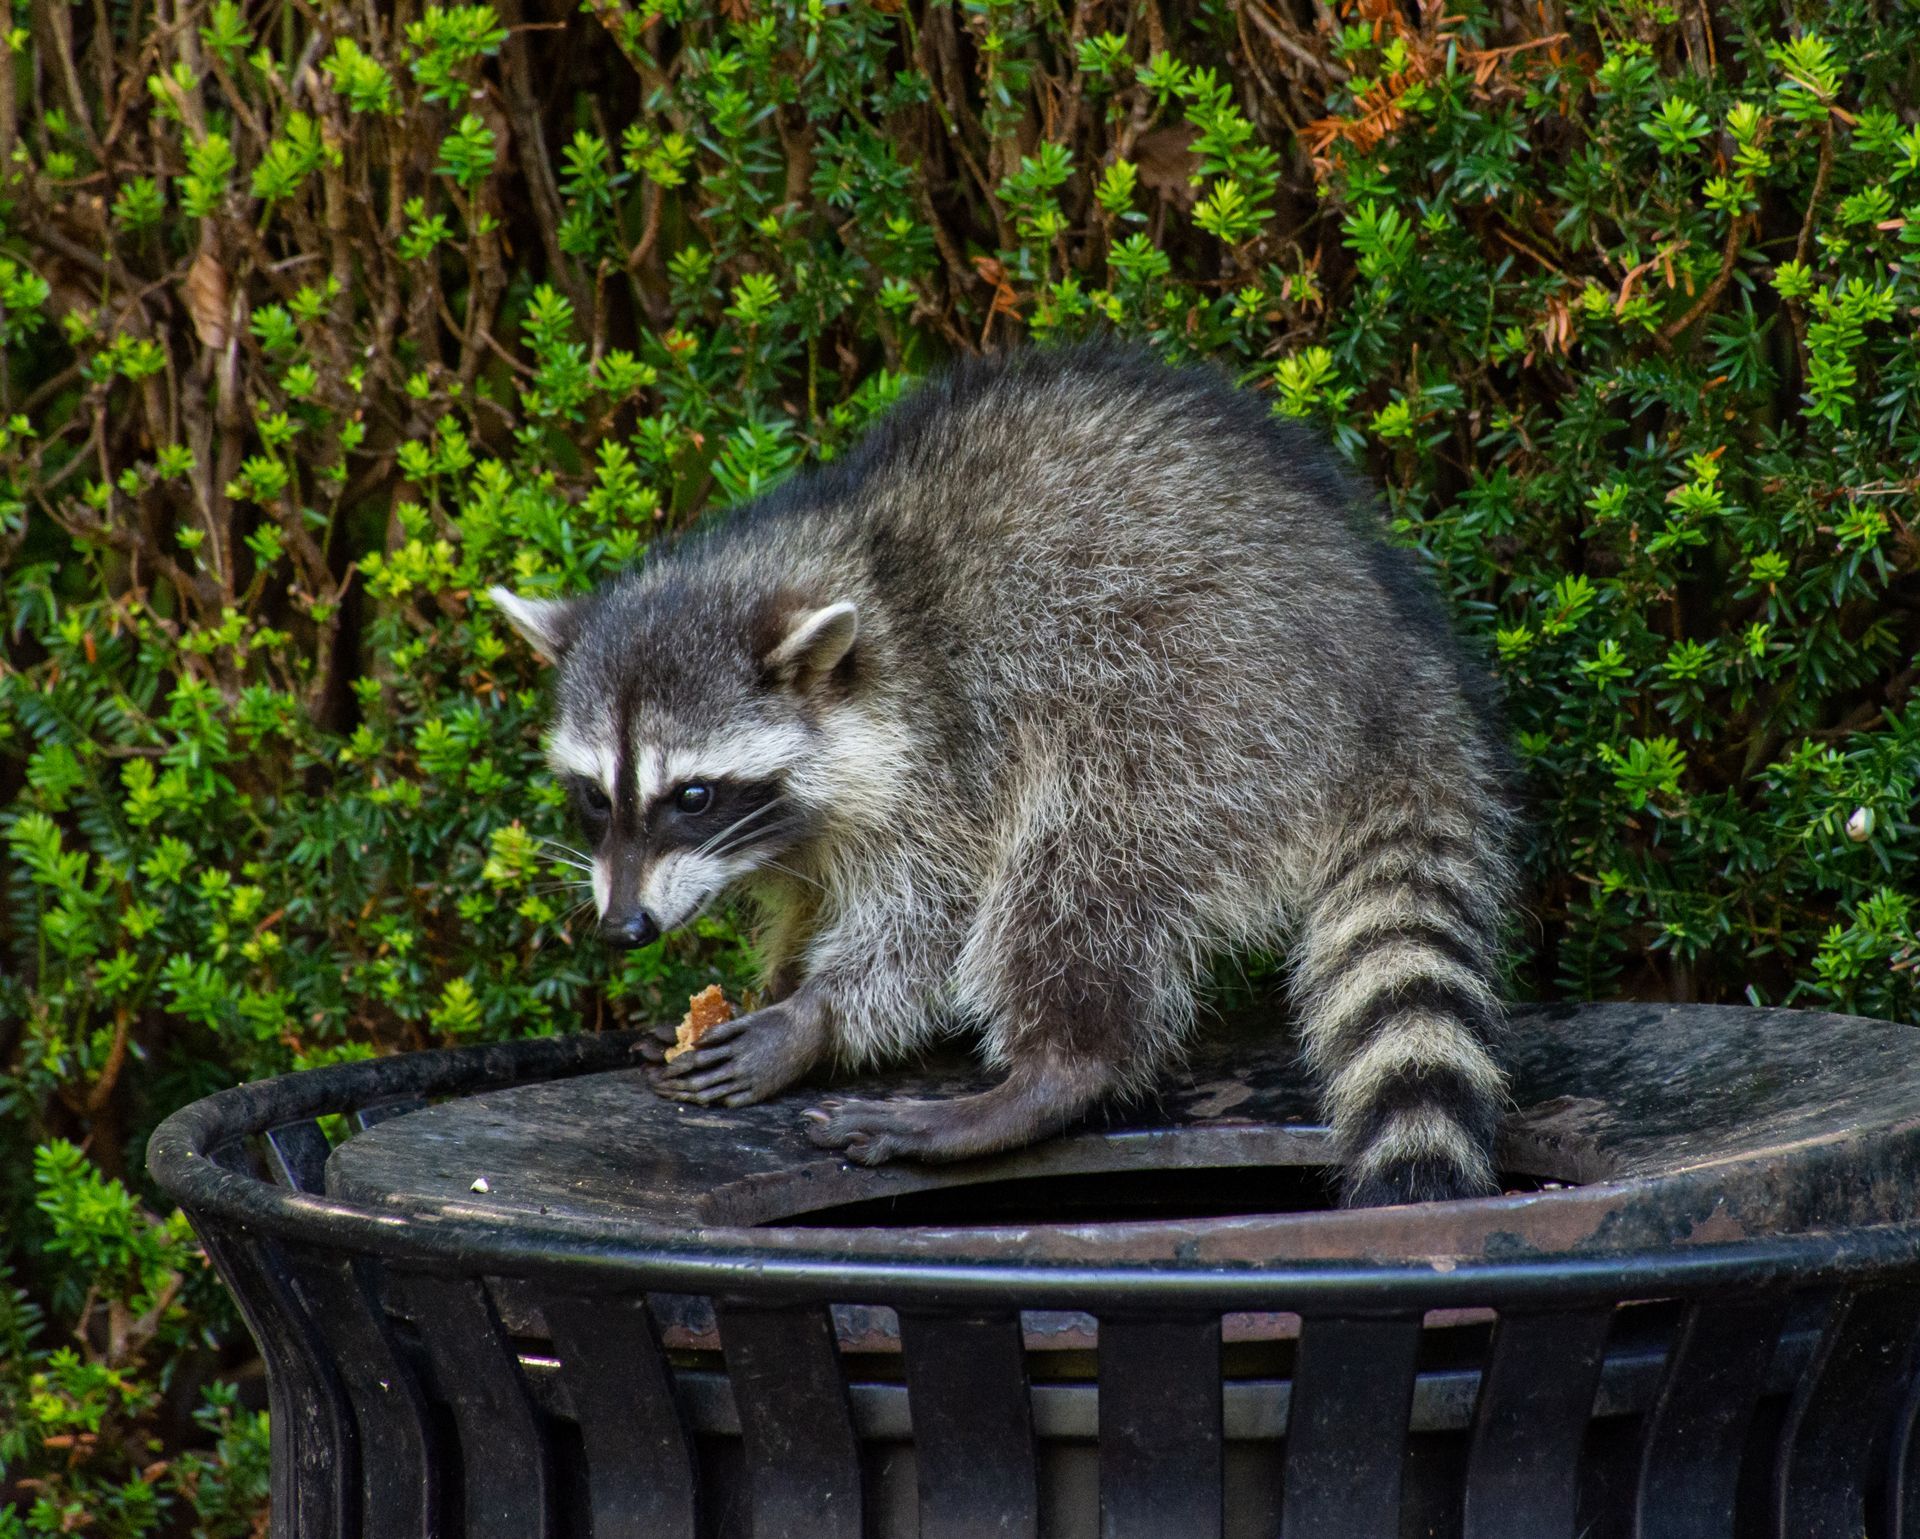 A Racoon Eating on the Trashcan